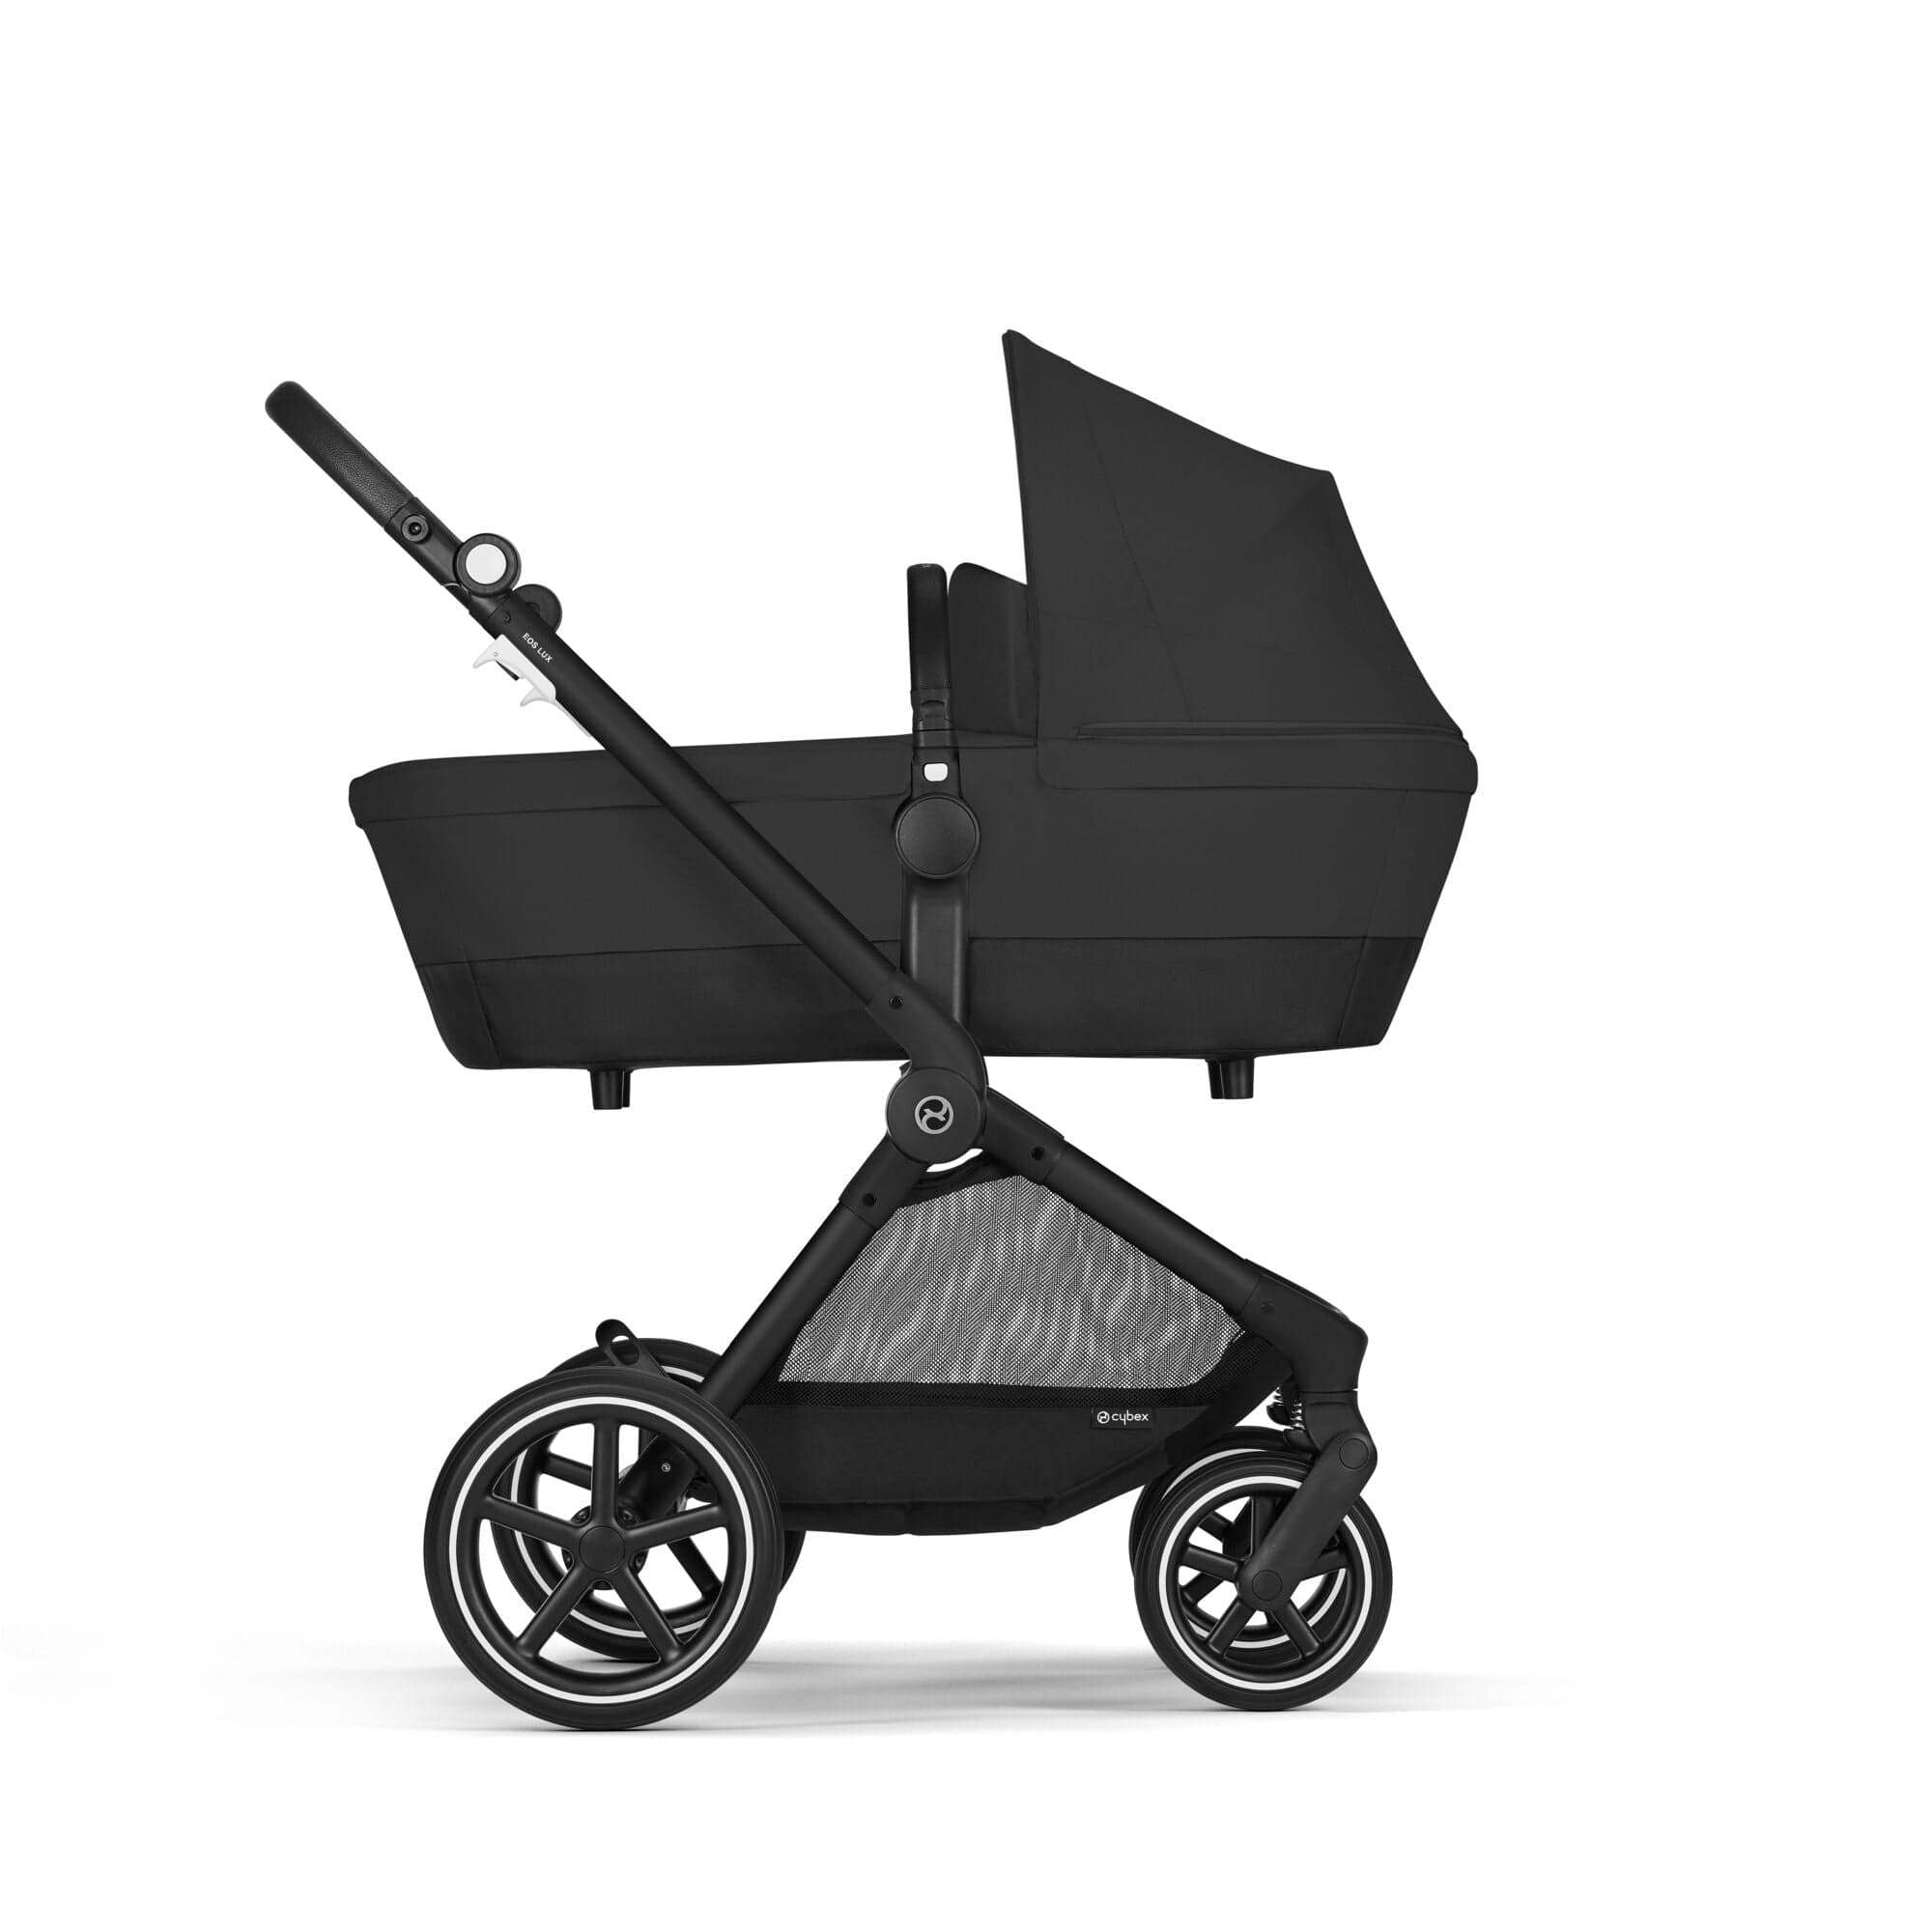 Cybex Eos Lux Stroller in Moon Black Travel Systems 522003827 4063846368112